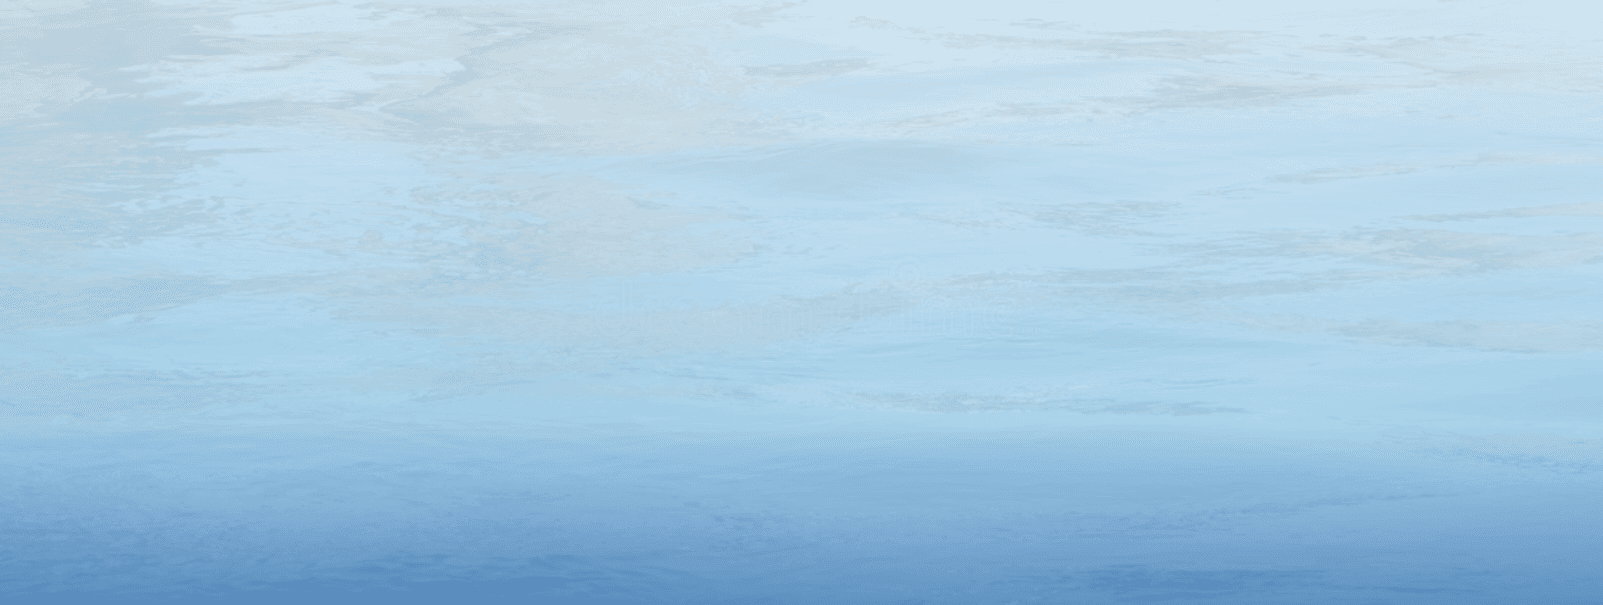 Water background image blue